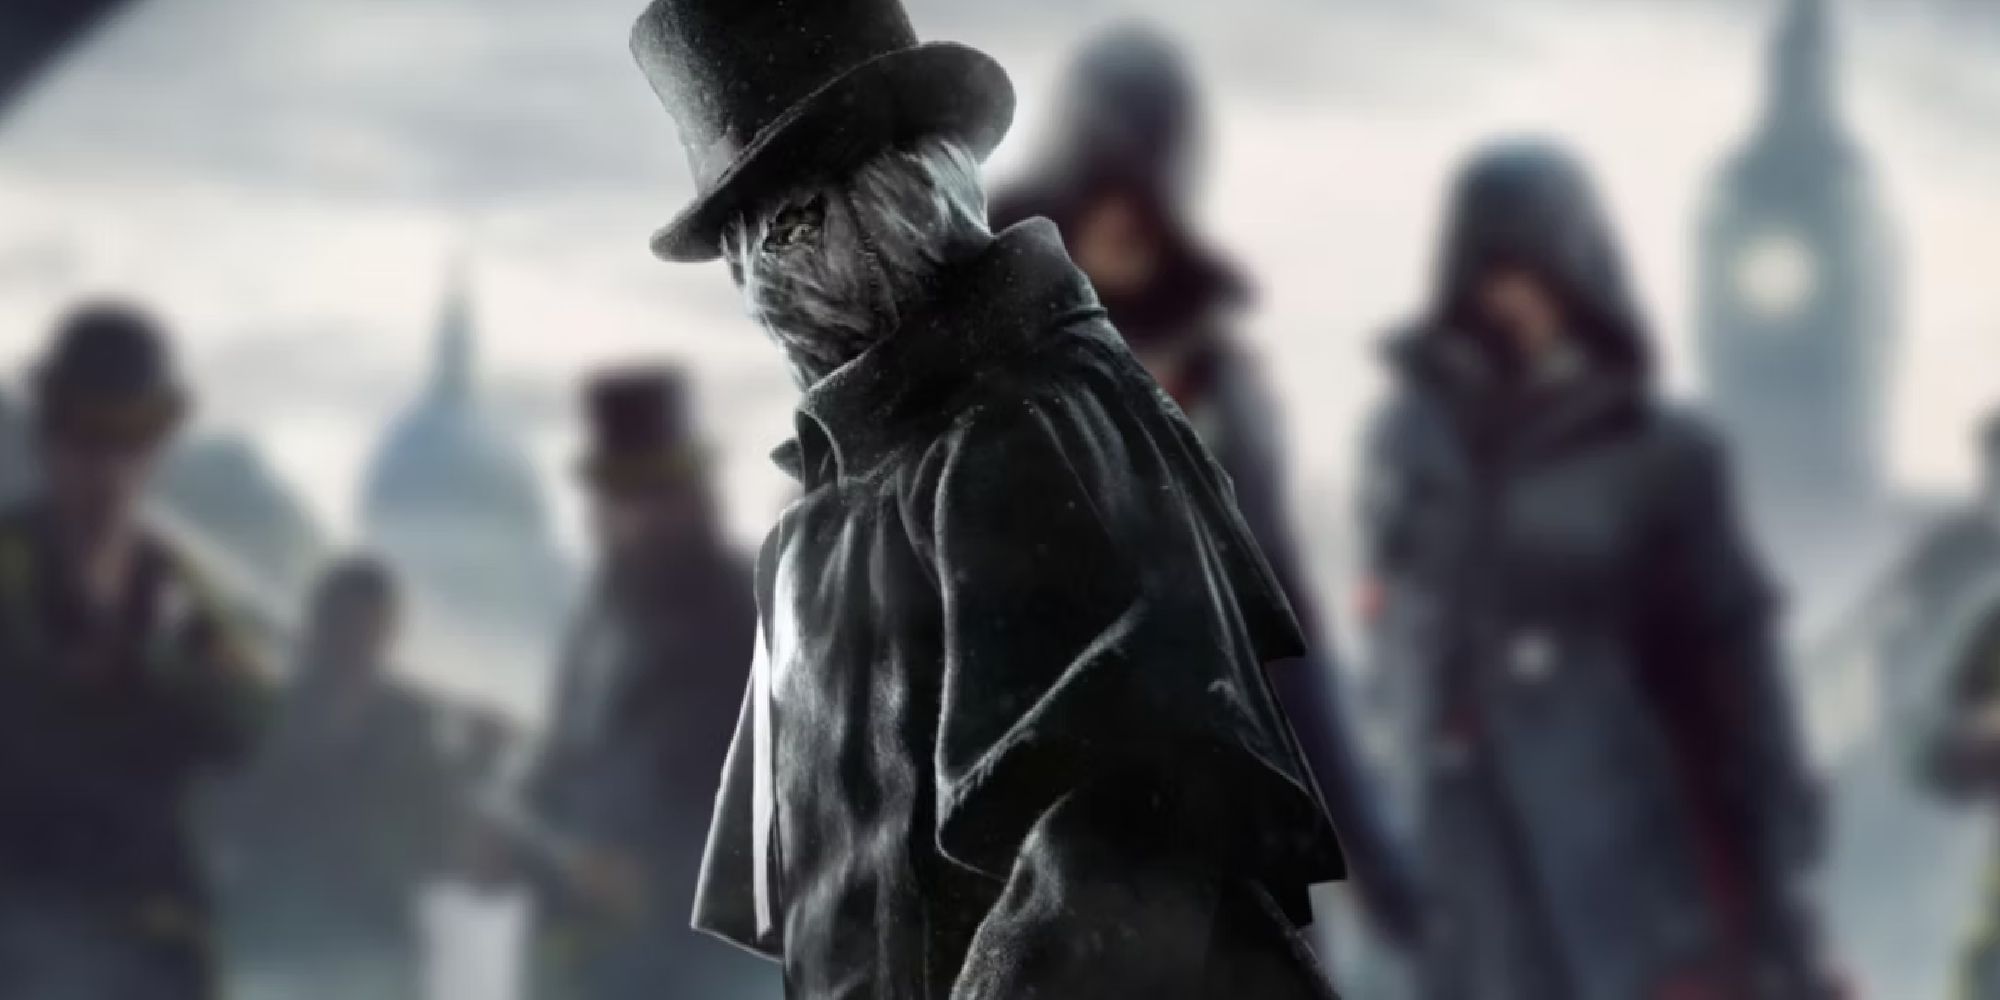 Jack the Ripper as featured in the DLC of the same name, looking at the viewer through the eyehole of a full-face cloth mask